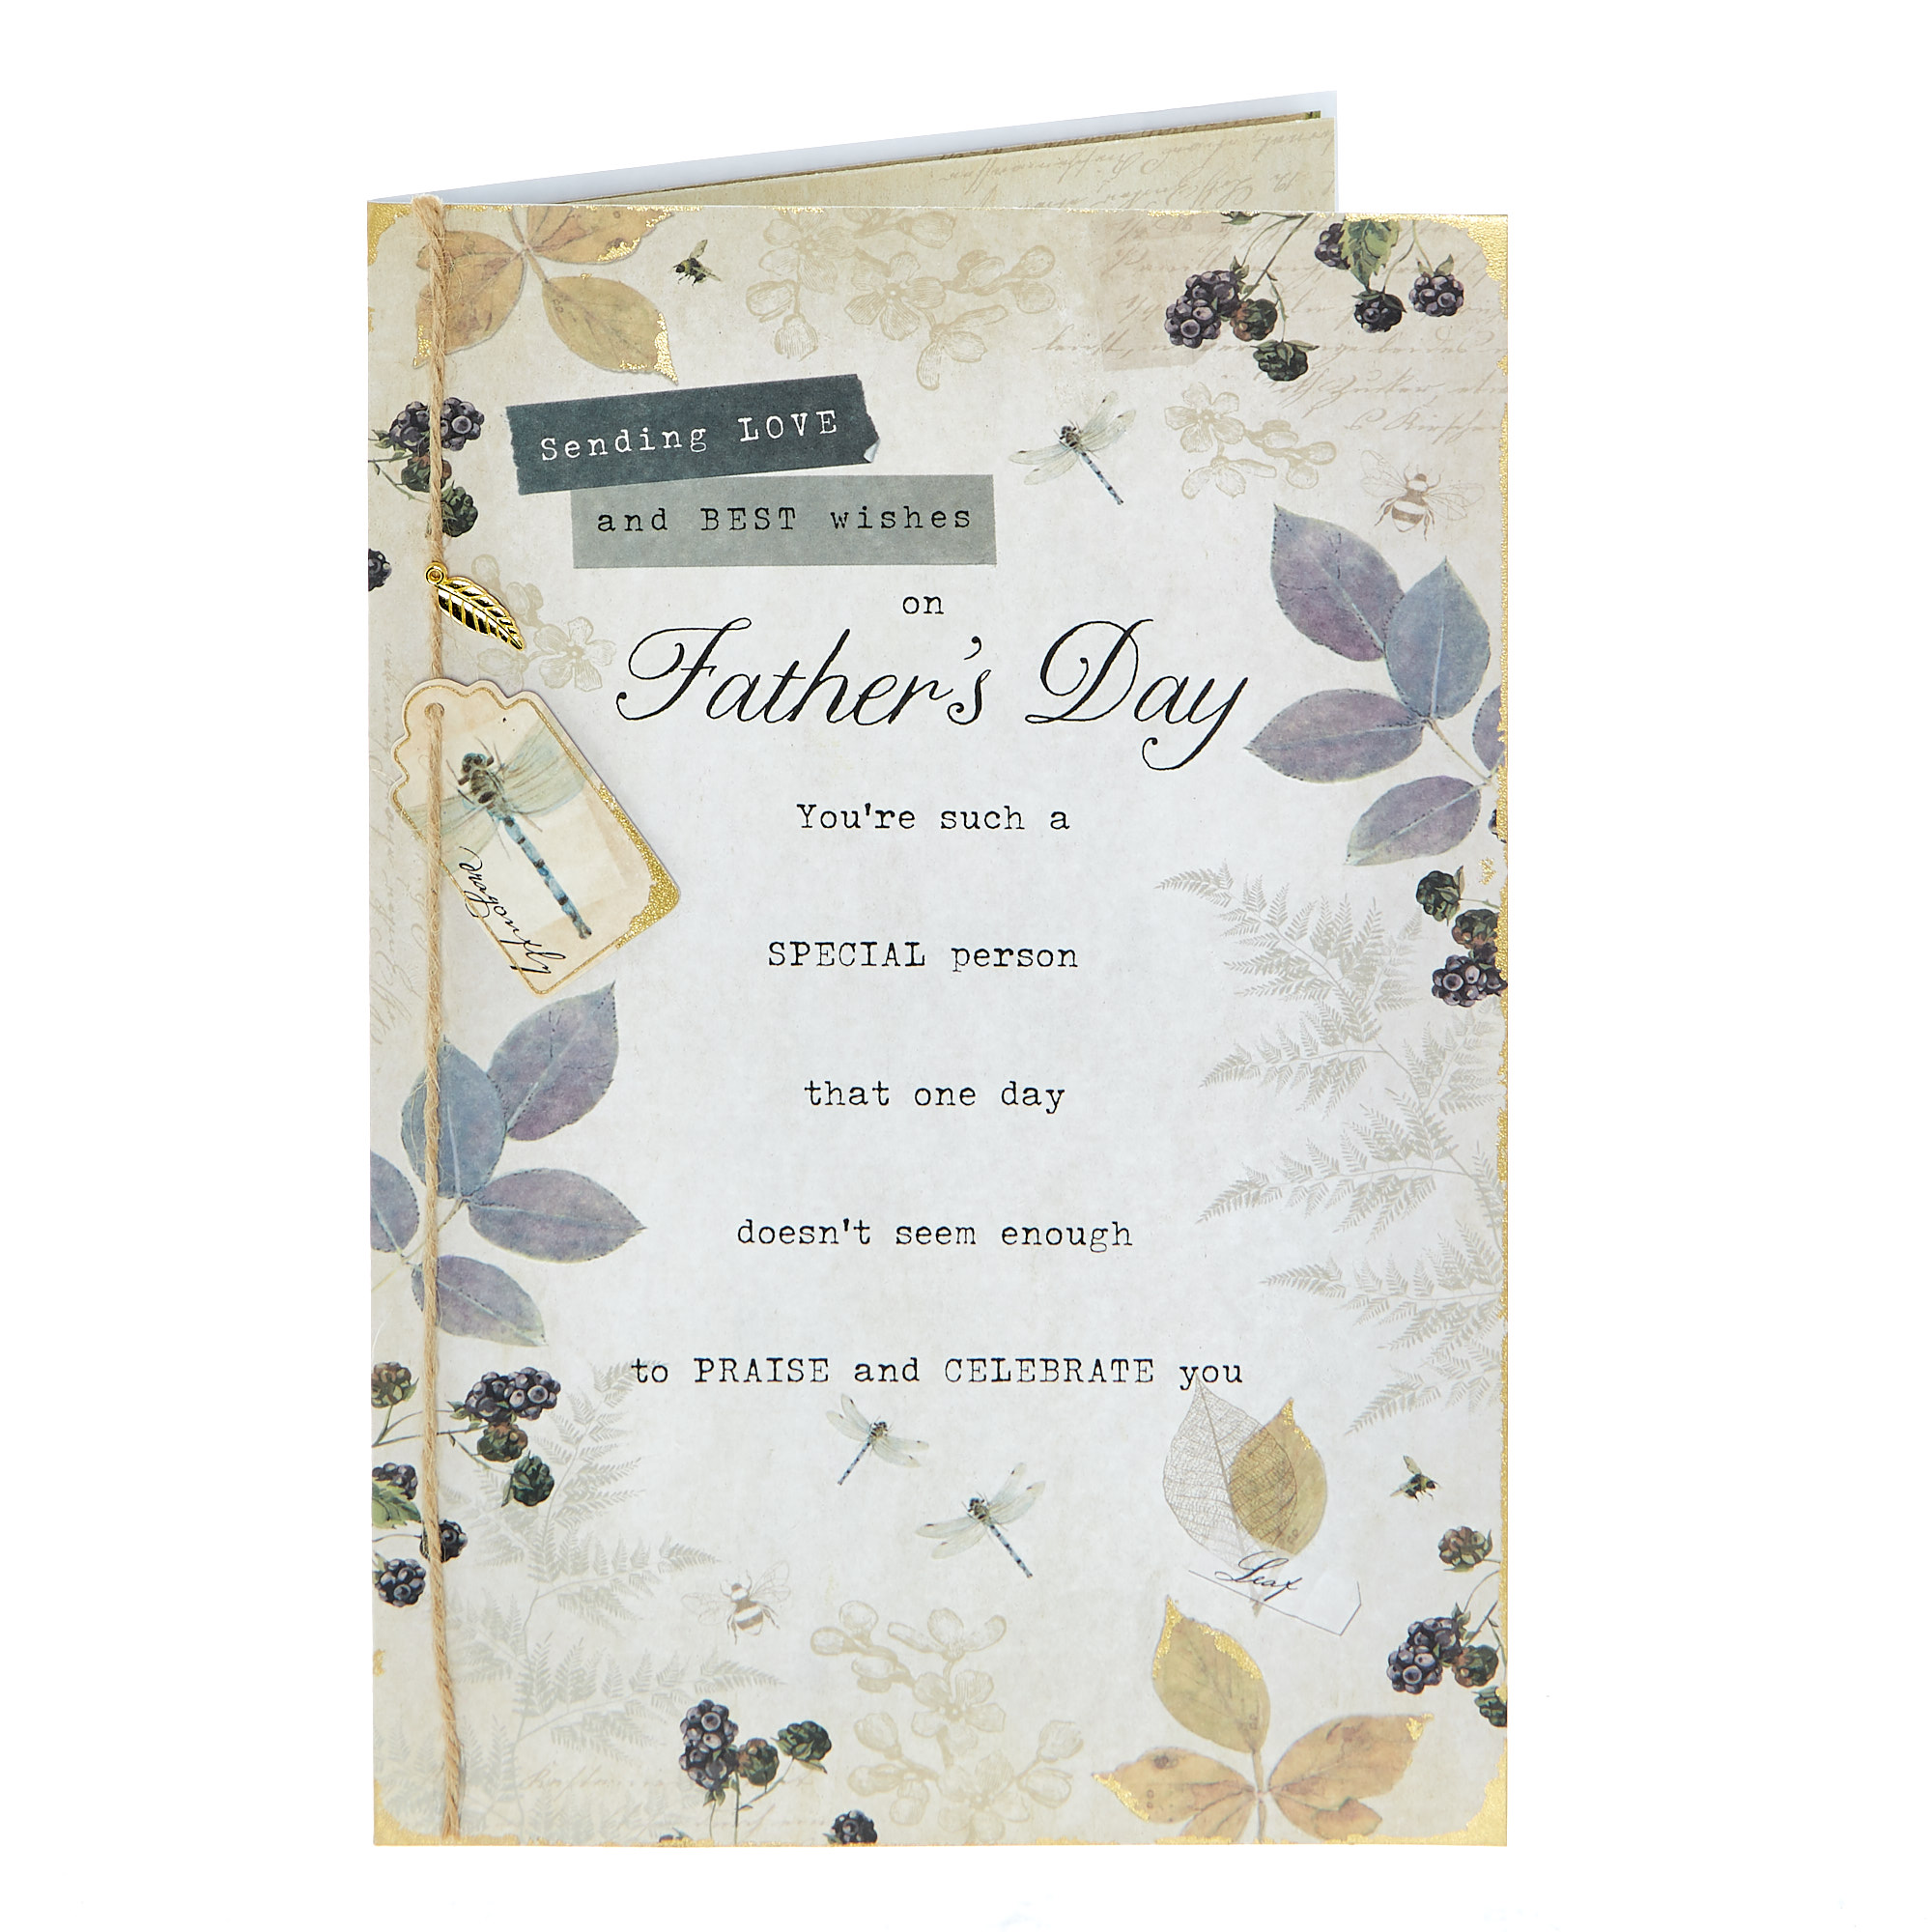 Father's Day Card - Sending Love & Best Wishes